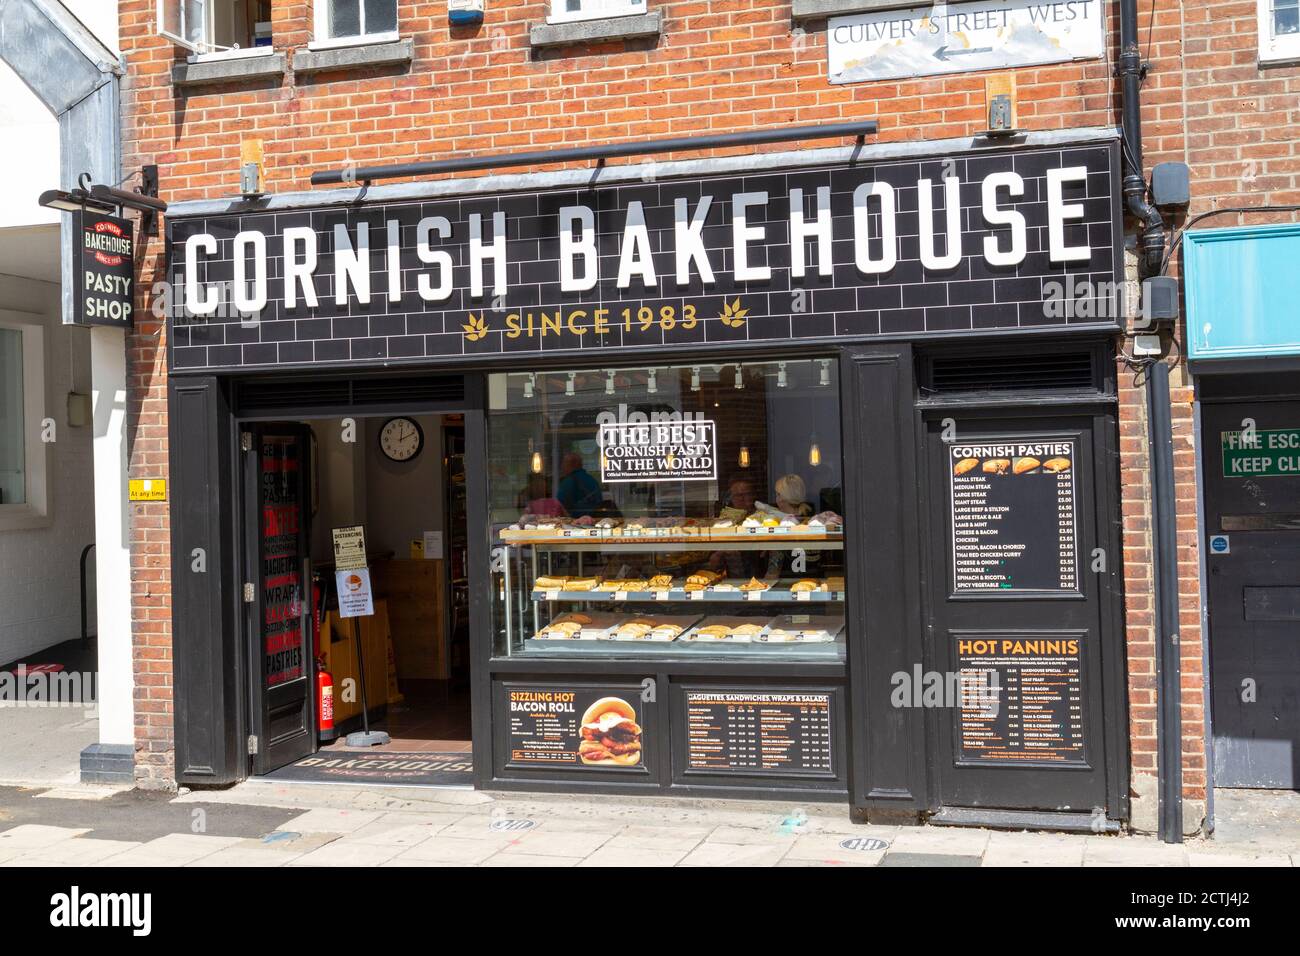 The Cornish Bakehouse on Culver St West in Colchester, Essex, UK. Foto Stock